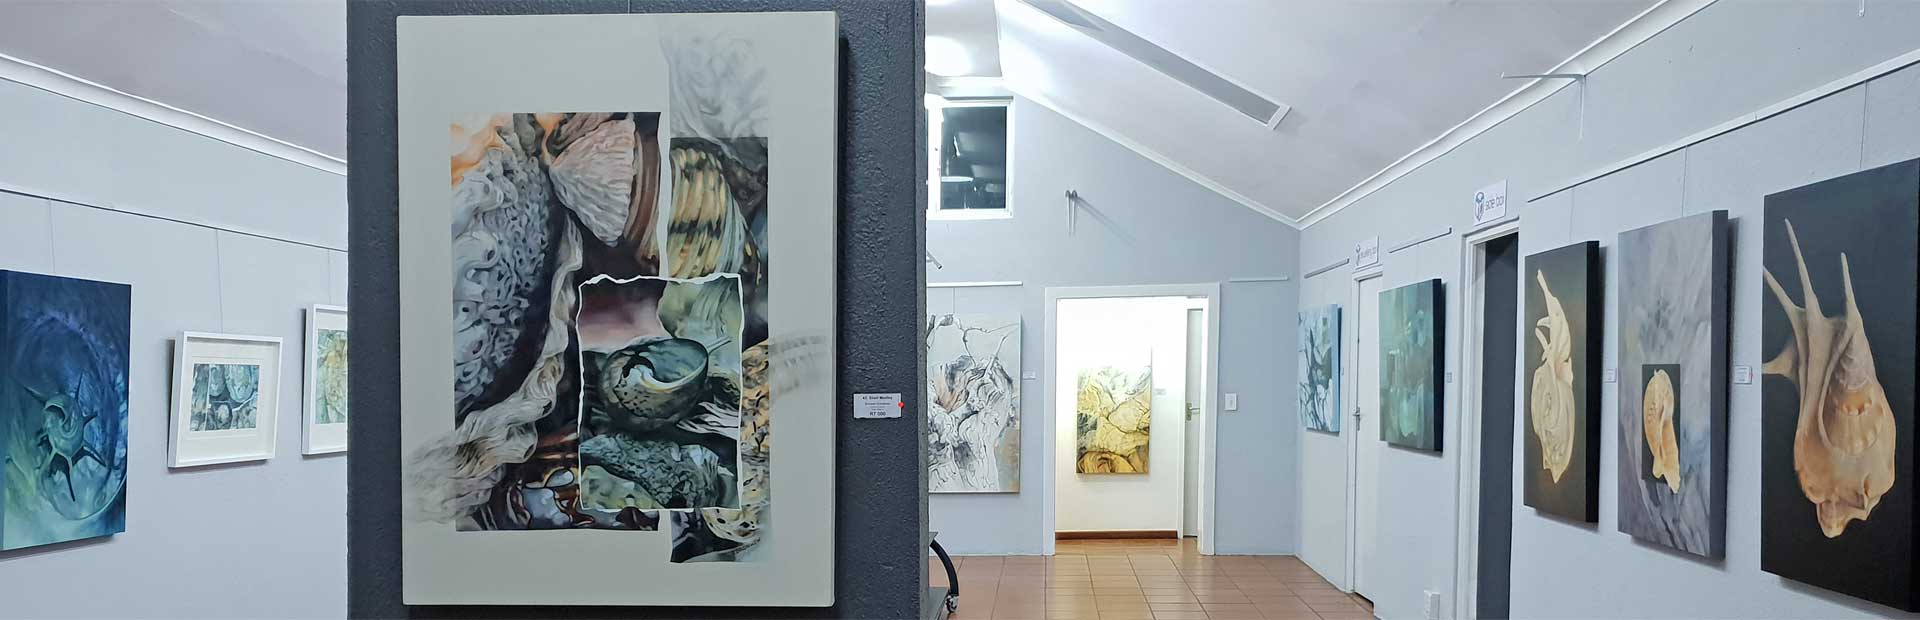 Bronwen Schalkwyk's Fine Art has been on local and international exhibition many times over the decades, with each the eye and heart are delighted by her brilliance shining through.